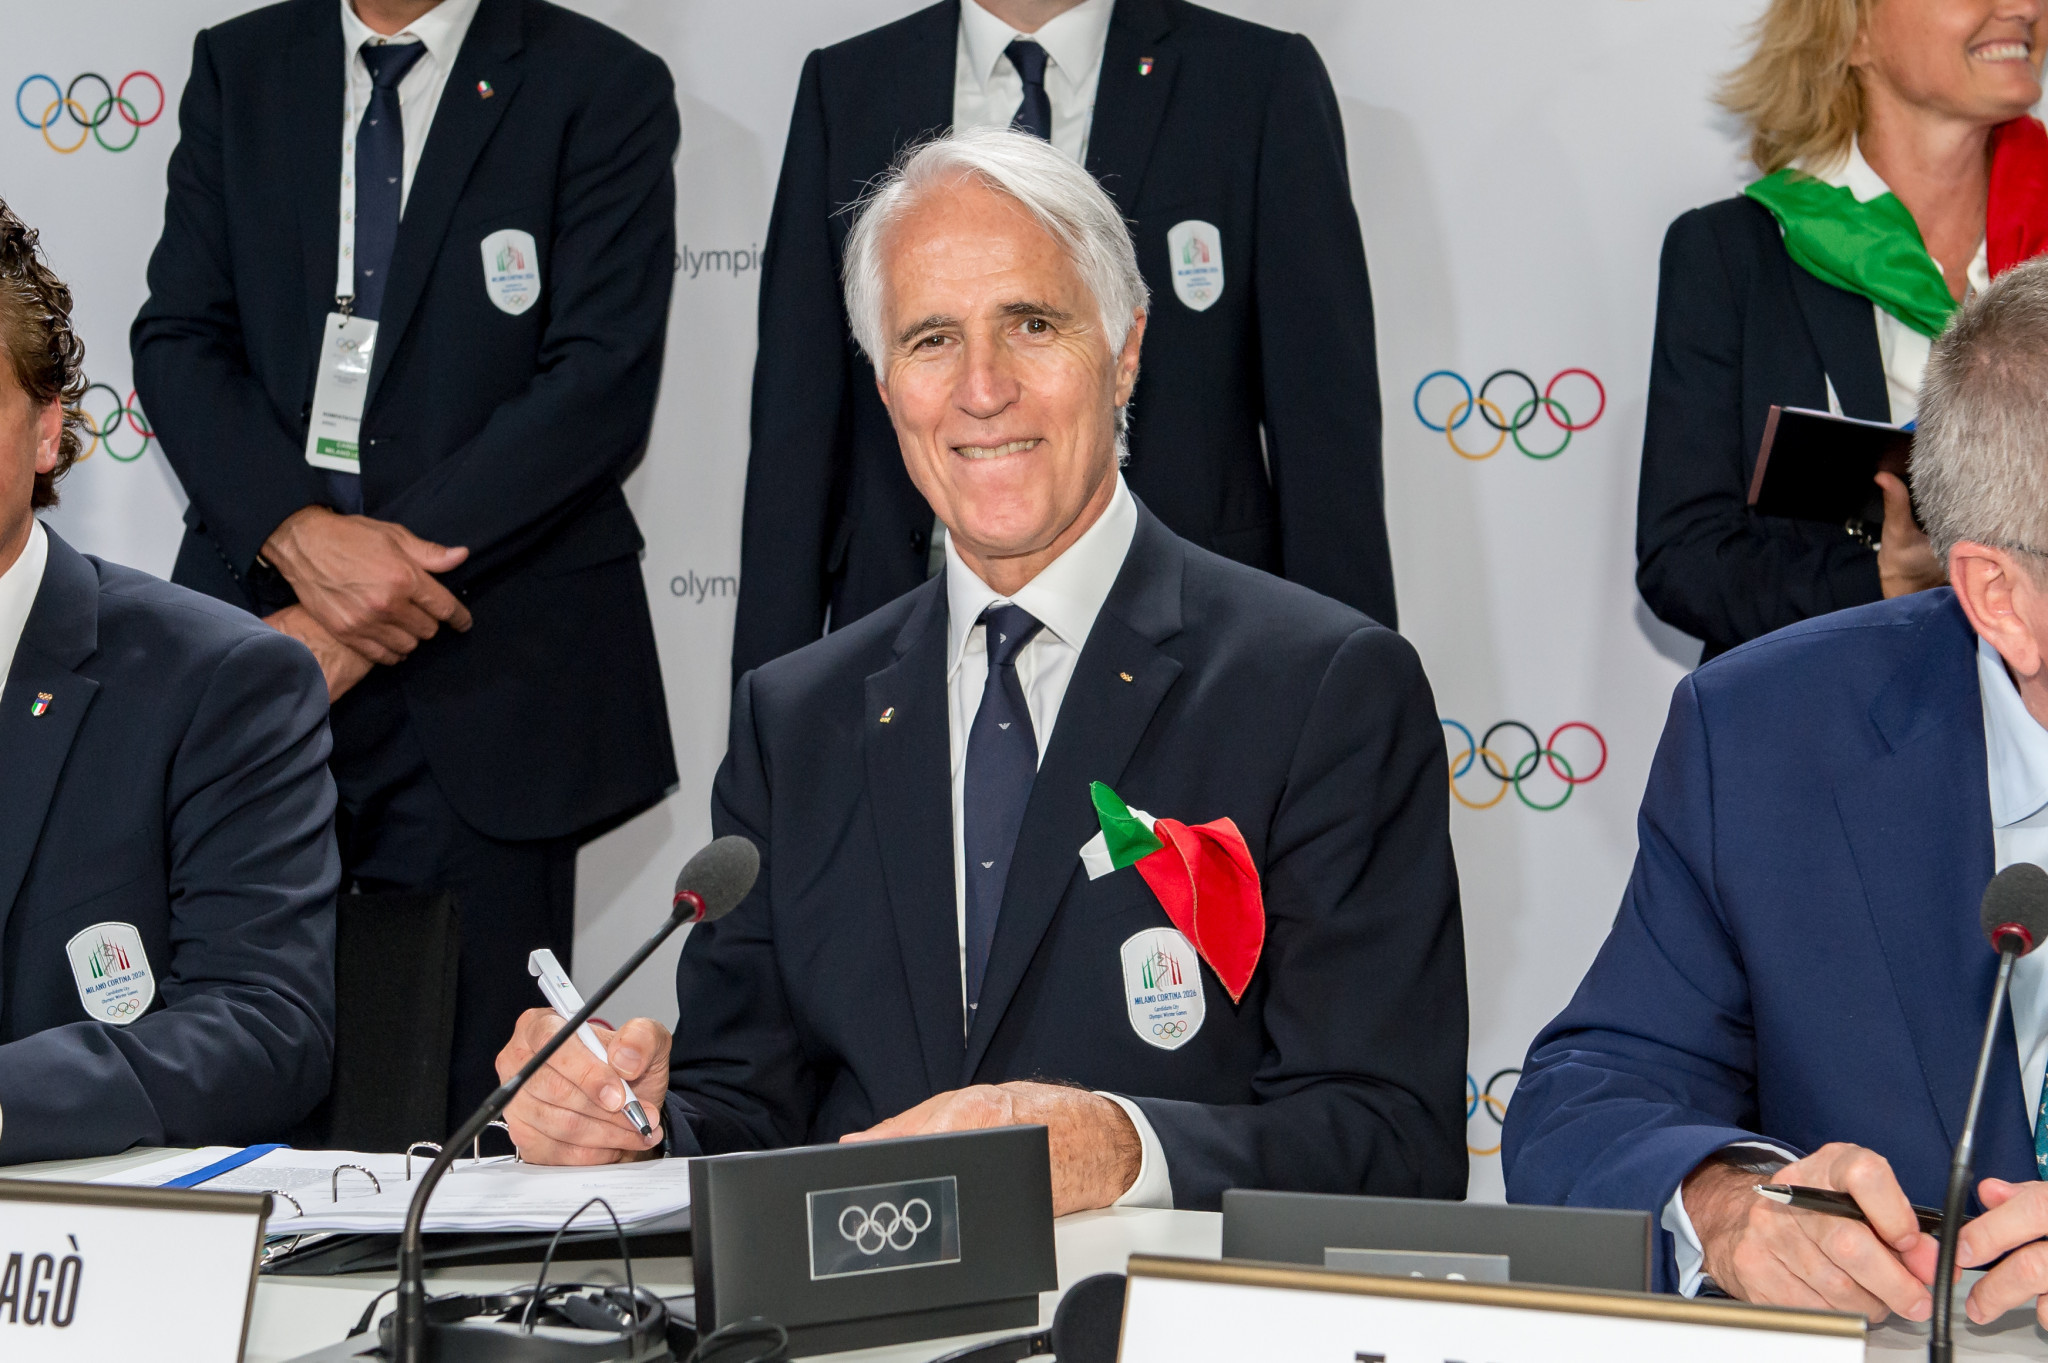 Giovanni Malagò has said Milan Cortina 2026 will be one of the lowest cost Winter Olympics ©Getty Images